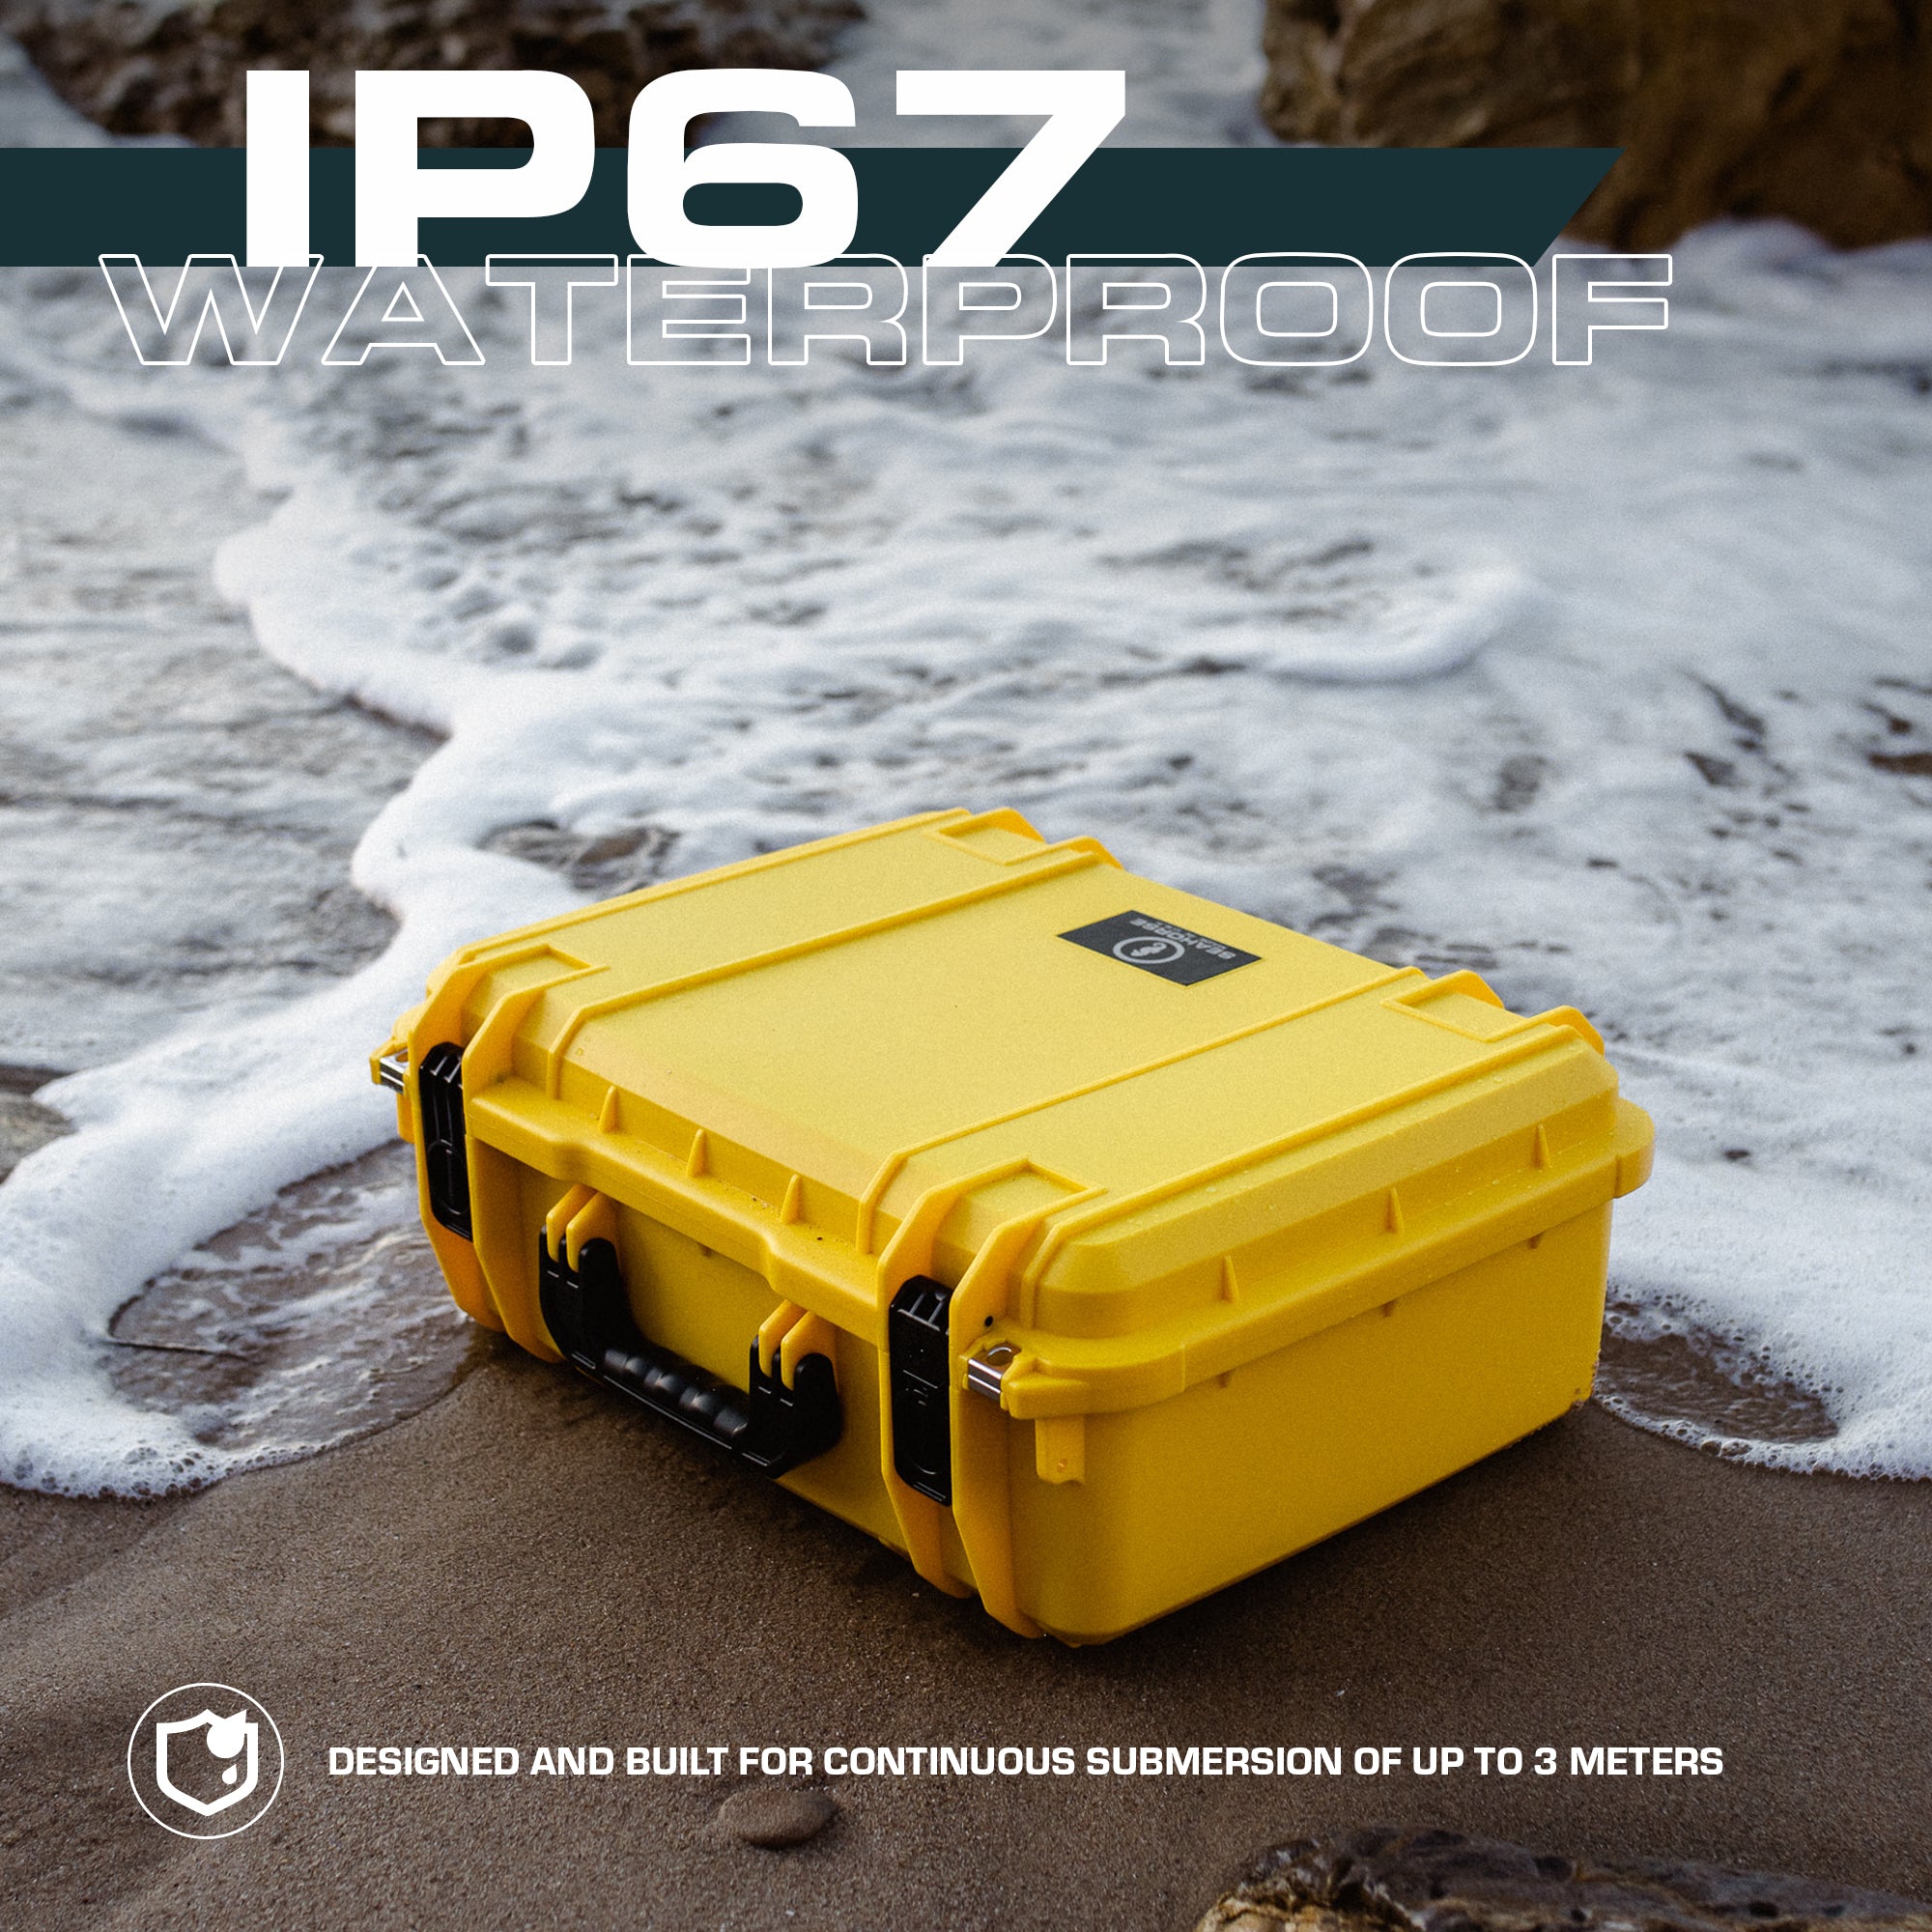 Seahorse SE730 Case - 18.1 x 12.9 x 7.9” - Rugged and Waterproof Cases  for Versatile Storage